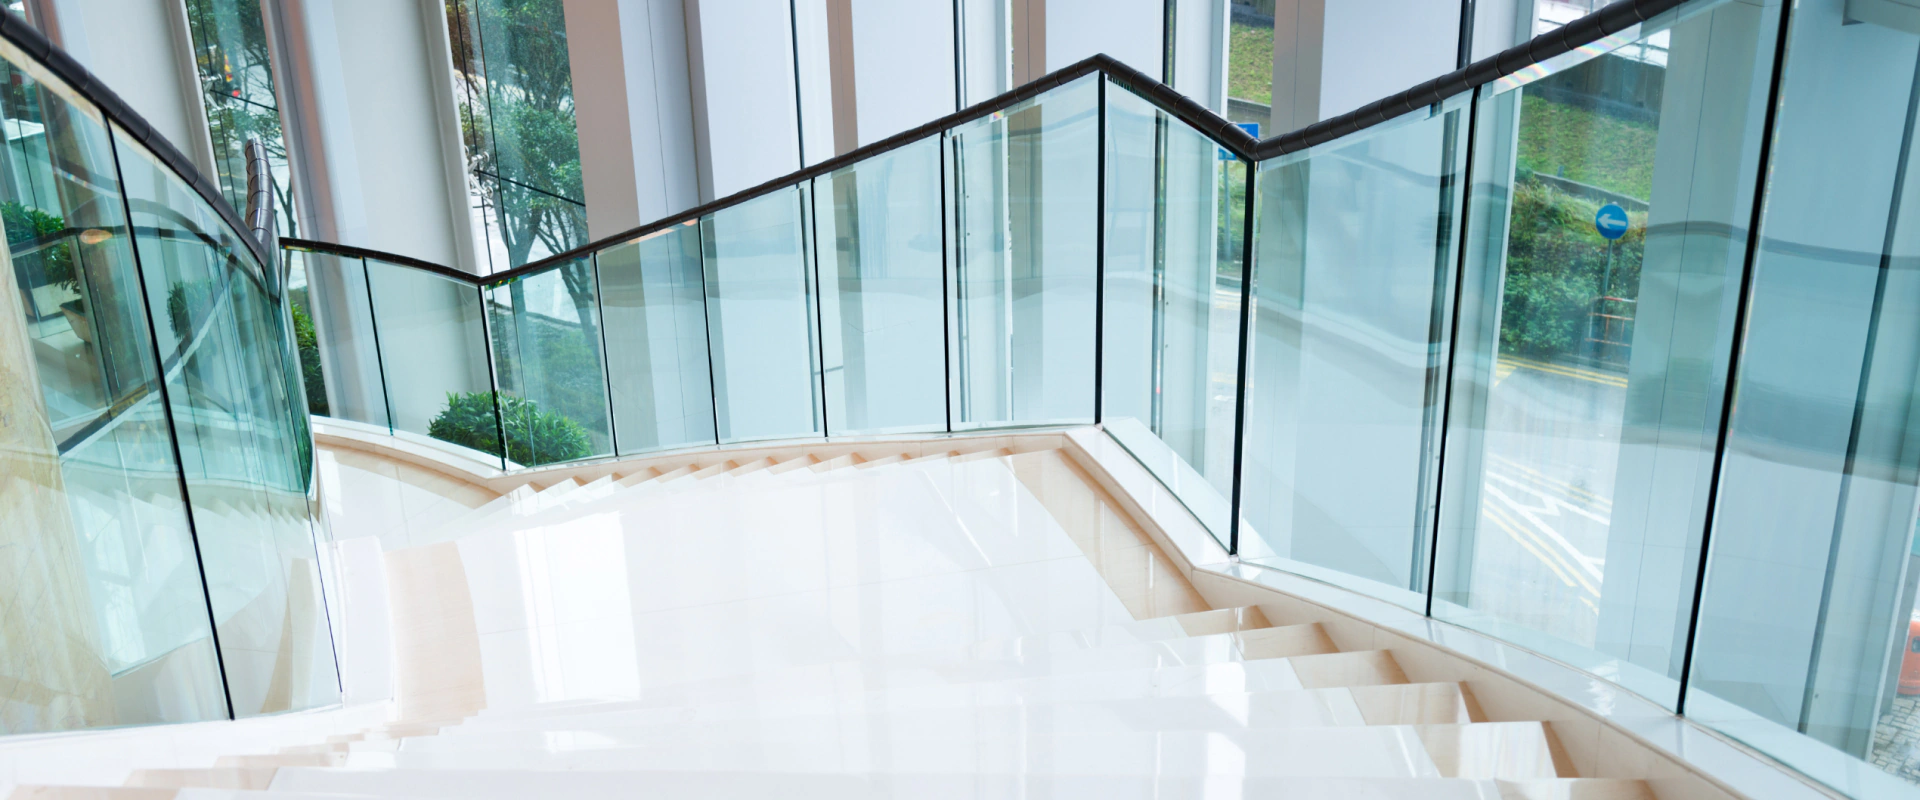 commercial building glass railing of stair